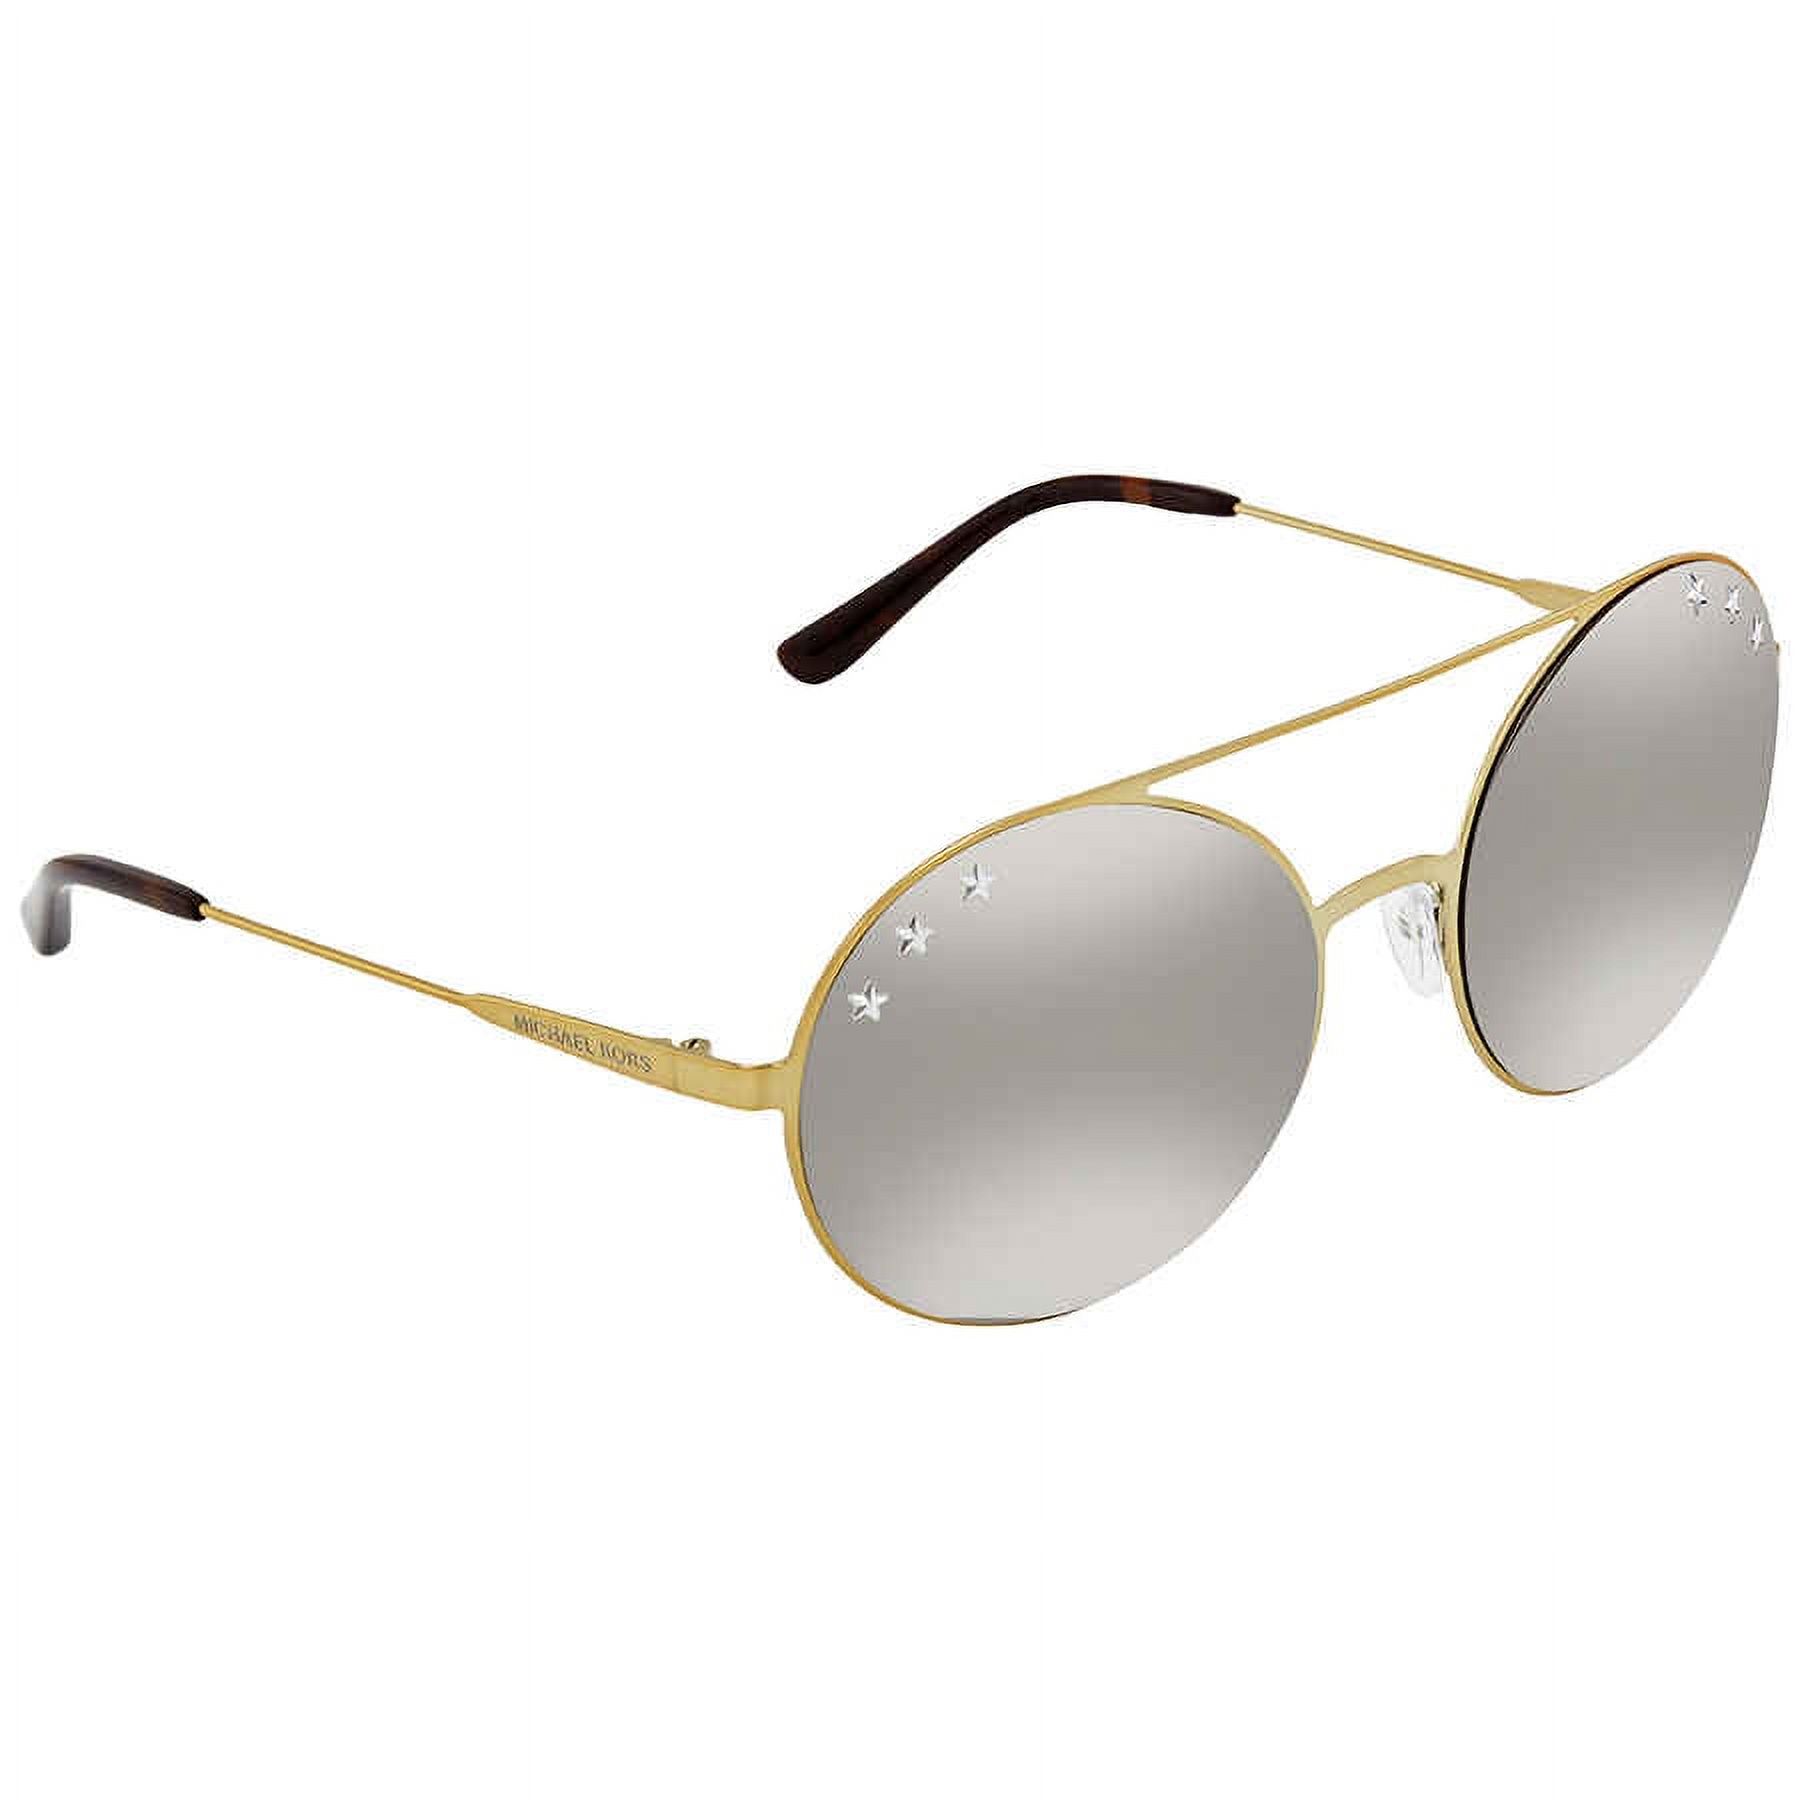 Michael Kors Cabo Metal Womens Round Sunglasses Pale Gold-Tone 55mm Adult - image 1 of 5